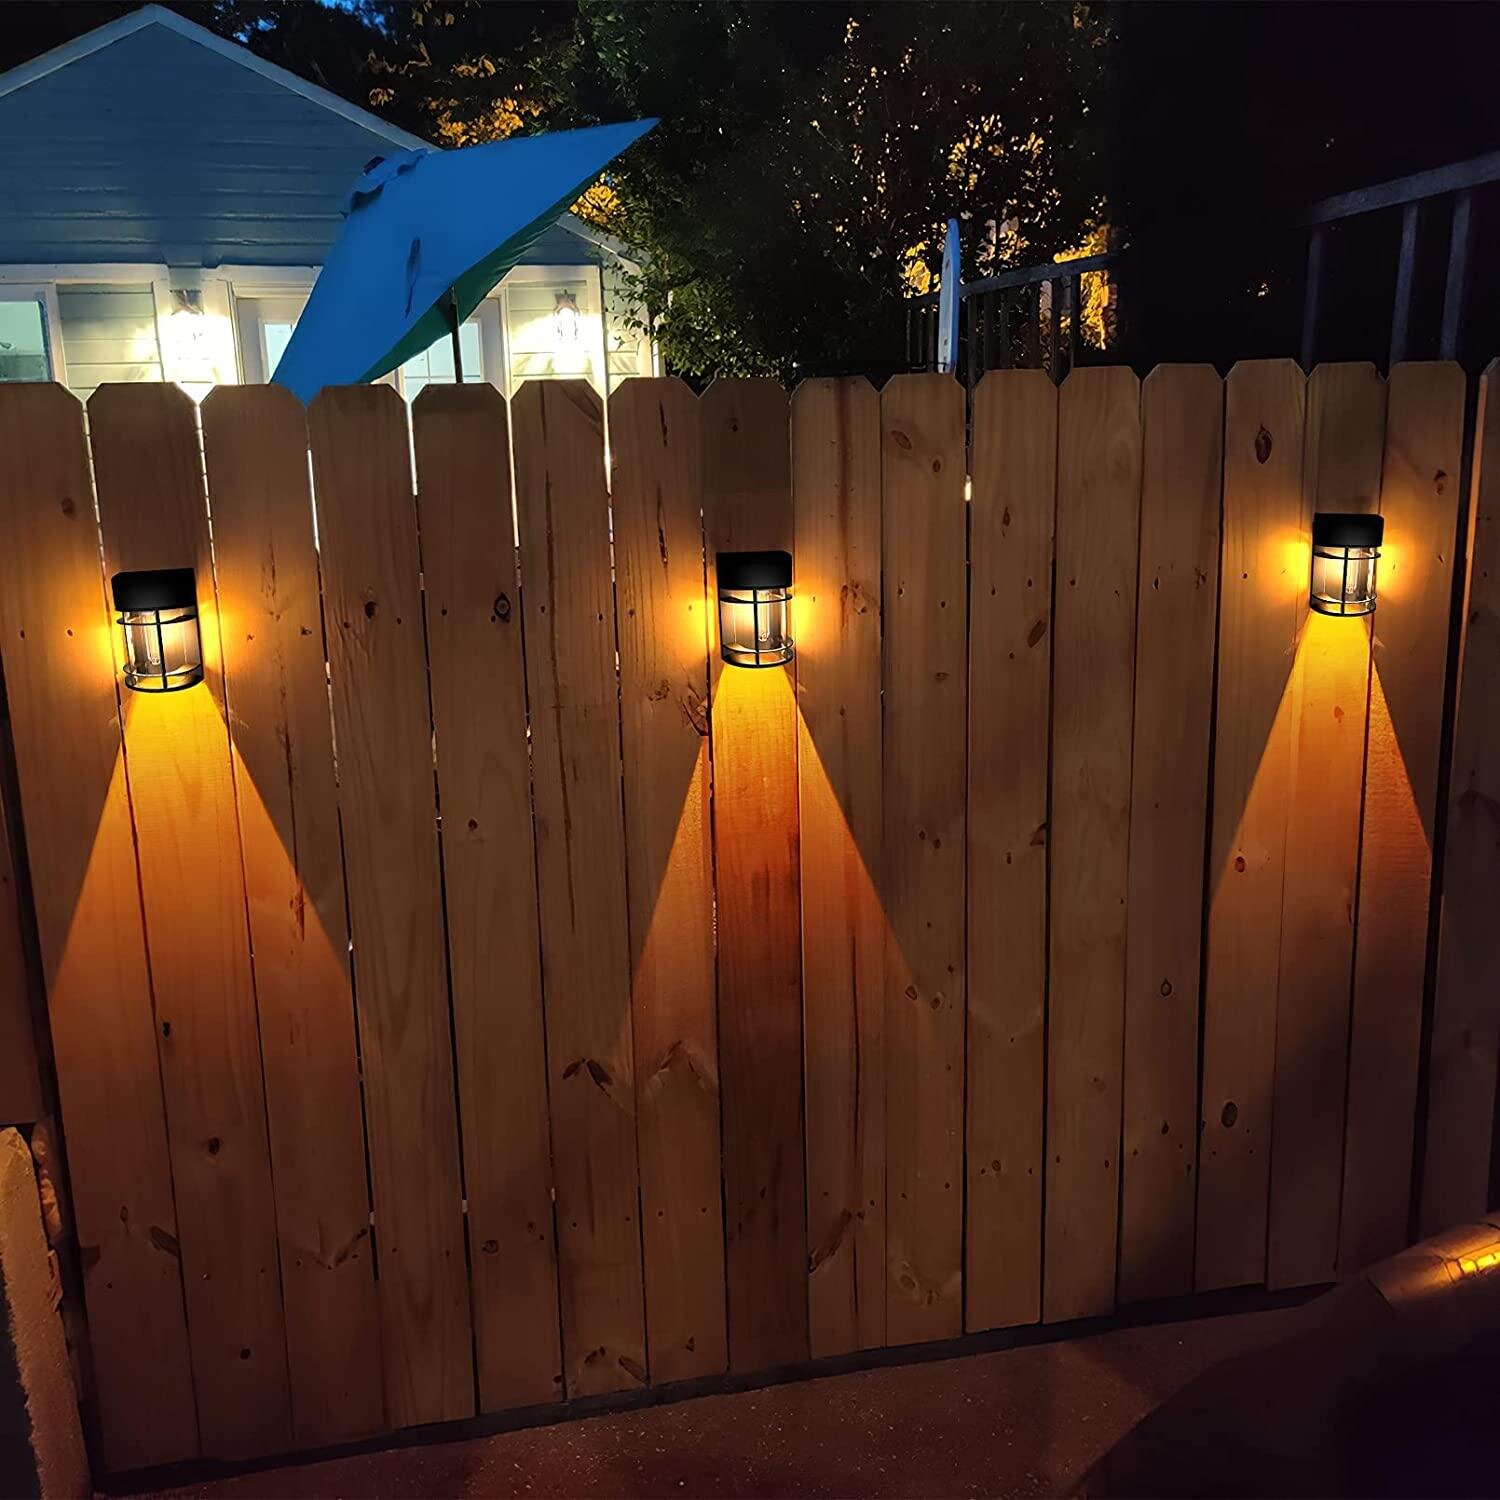 4 Pack Solar Wall Lights LED Light Solar Deck Lights Outdoor 3 Mode Porch Lights IP55 Waterproof Solar Fence Lights Outdoor Lighting for Patio Stairs Post Pathway Porch Driveway Yard Garden Decor